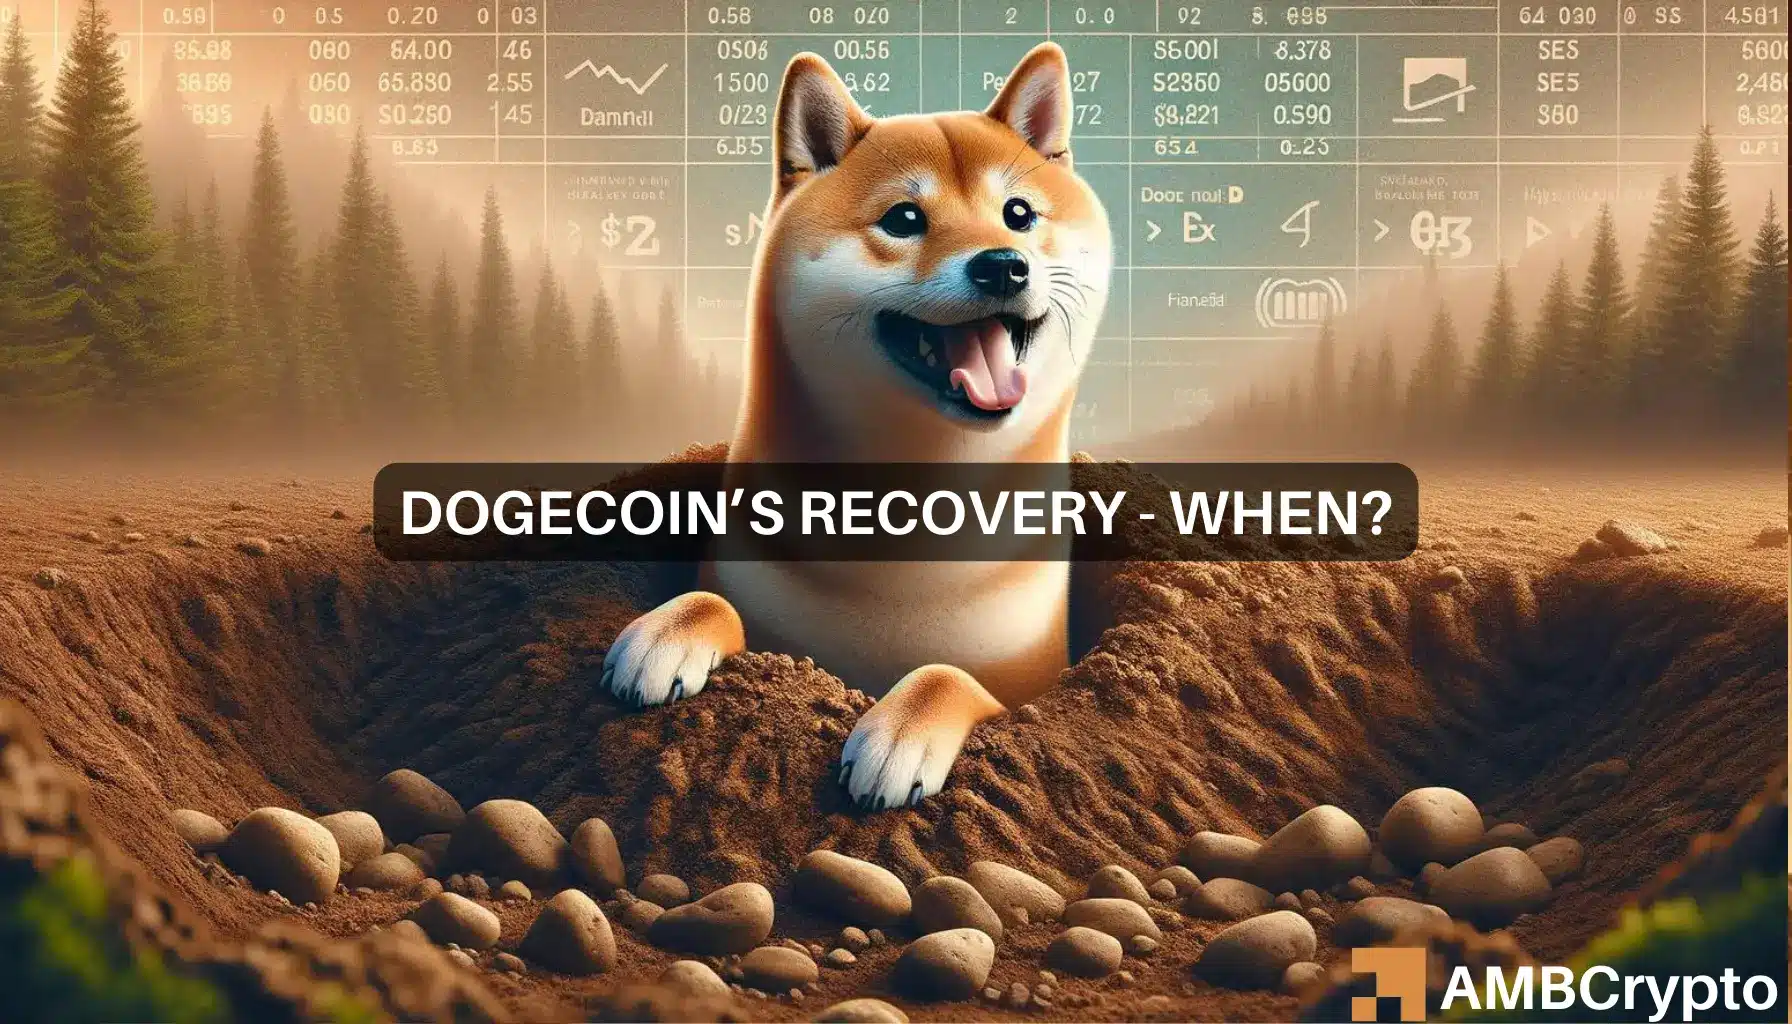 Dogecoin’s price recovery – Identifying the real odds of that happening